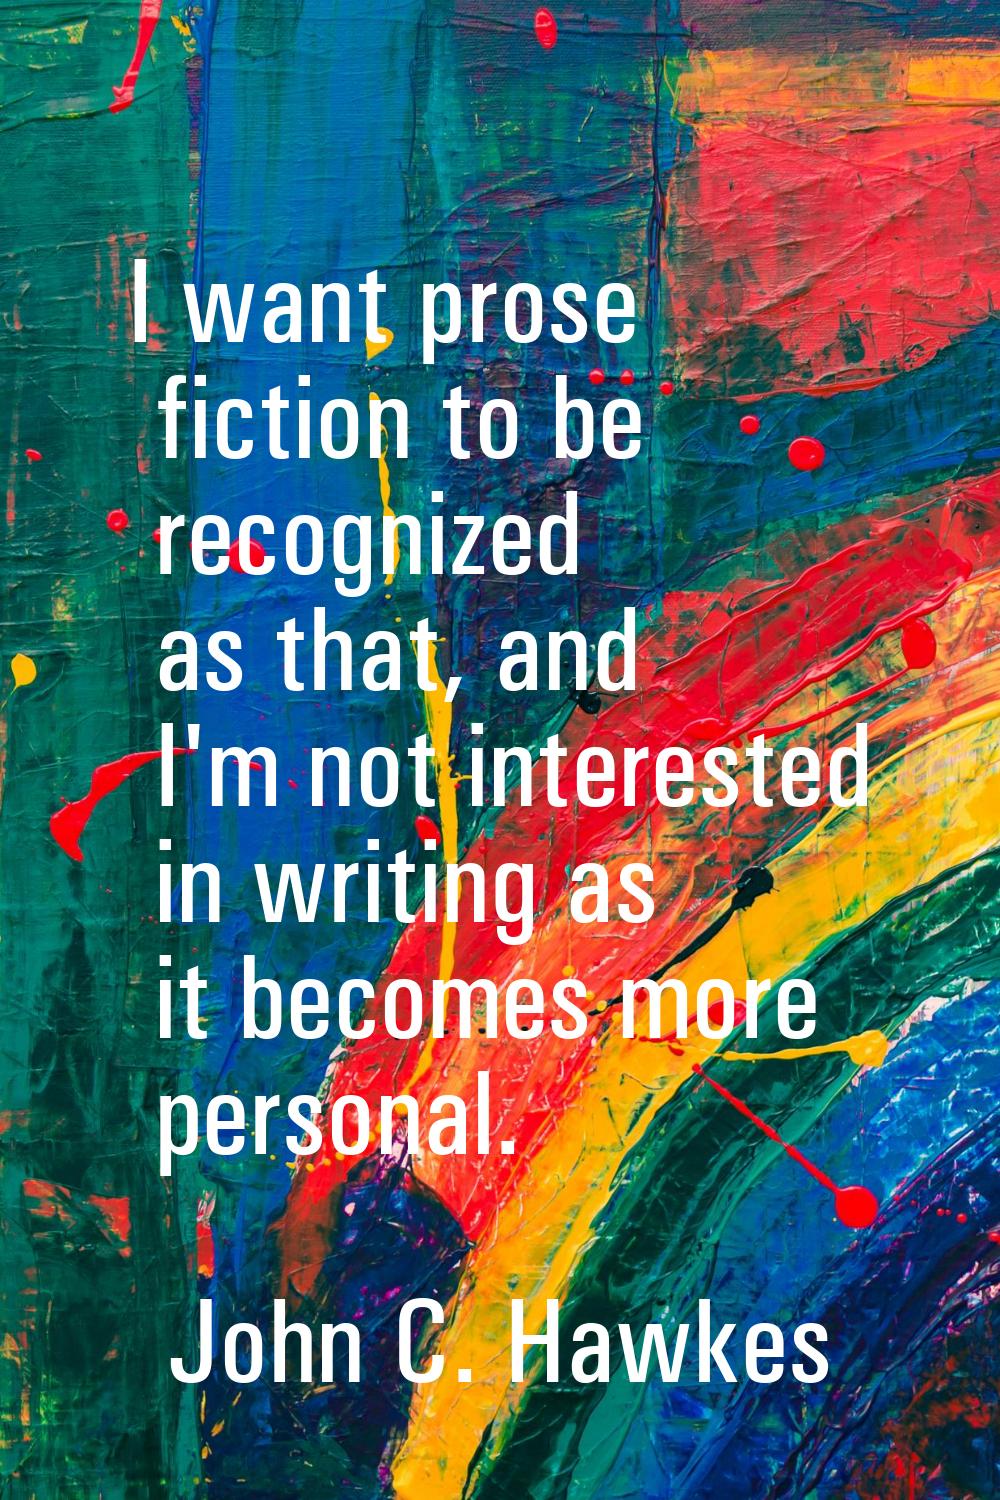 I want prose fiction to be recognized as that, and I'm not interested in writing as it becomes more